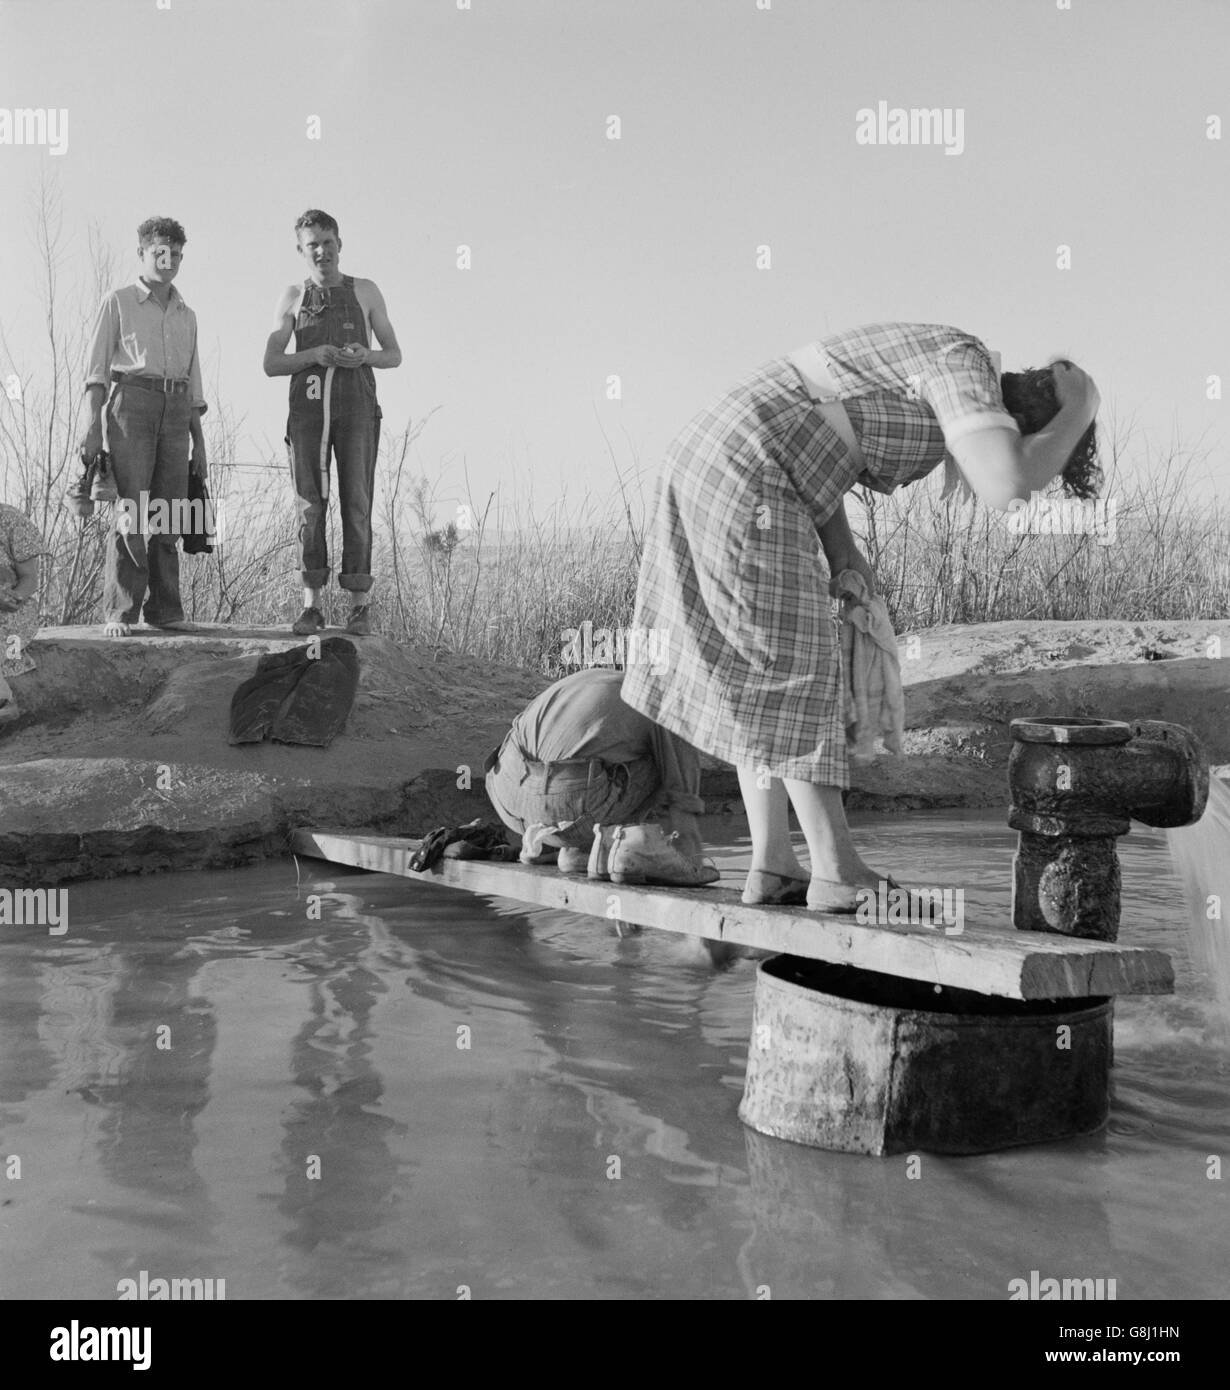 Oklahoma Migratory Workers Washing in Hot Spring in Desert, Imperial Valley, California, USA, Dorothea Lange for Farm Security Administration, March 1937 Stock Photo